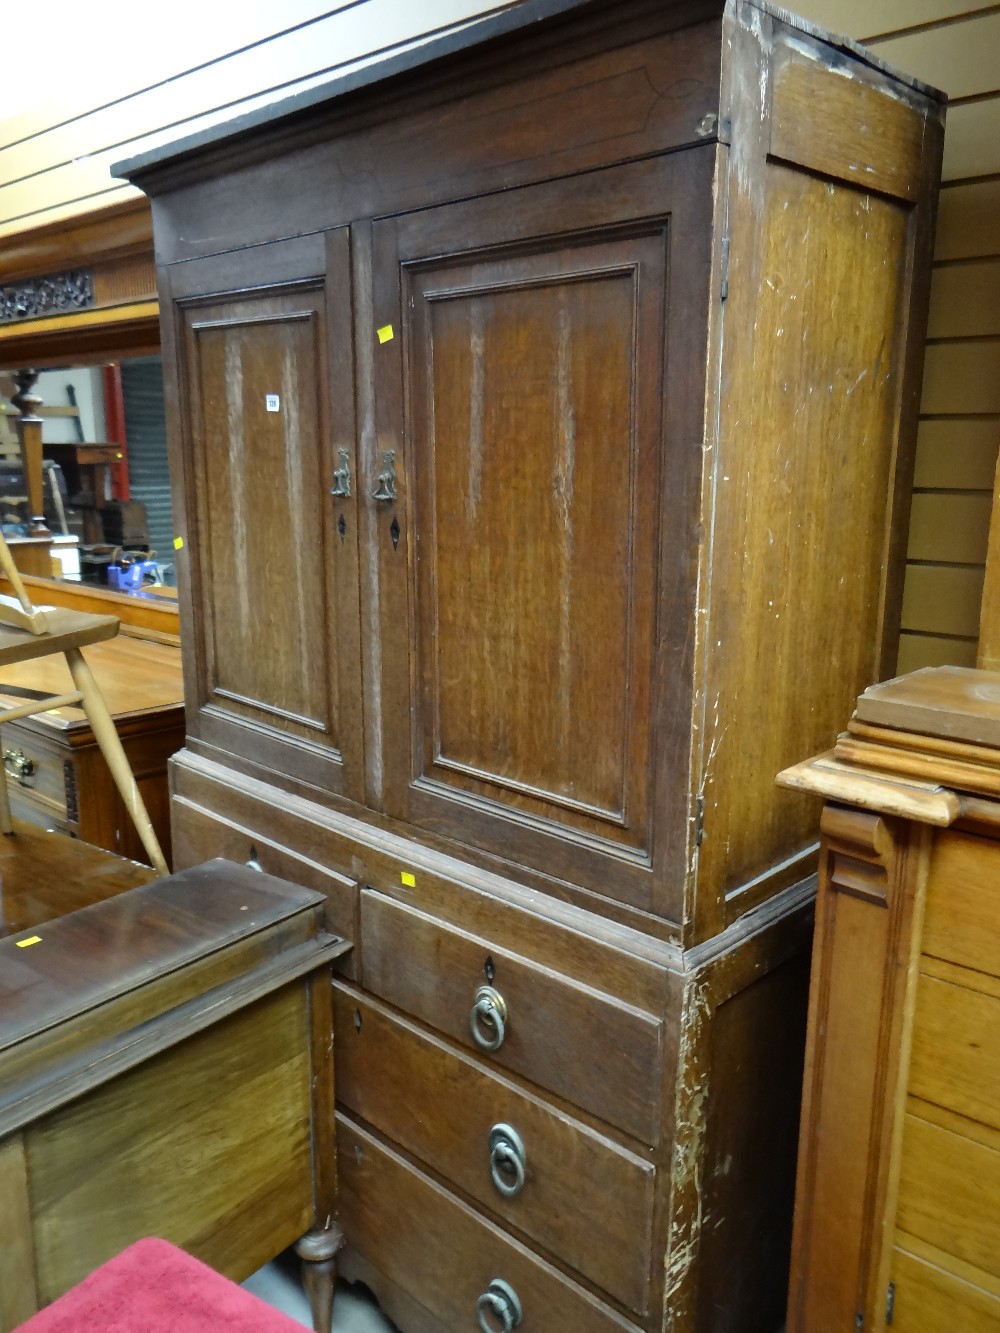 A nineteenth century oak press cupboard with a base of two long & two short drawers